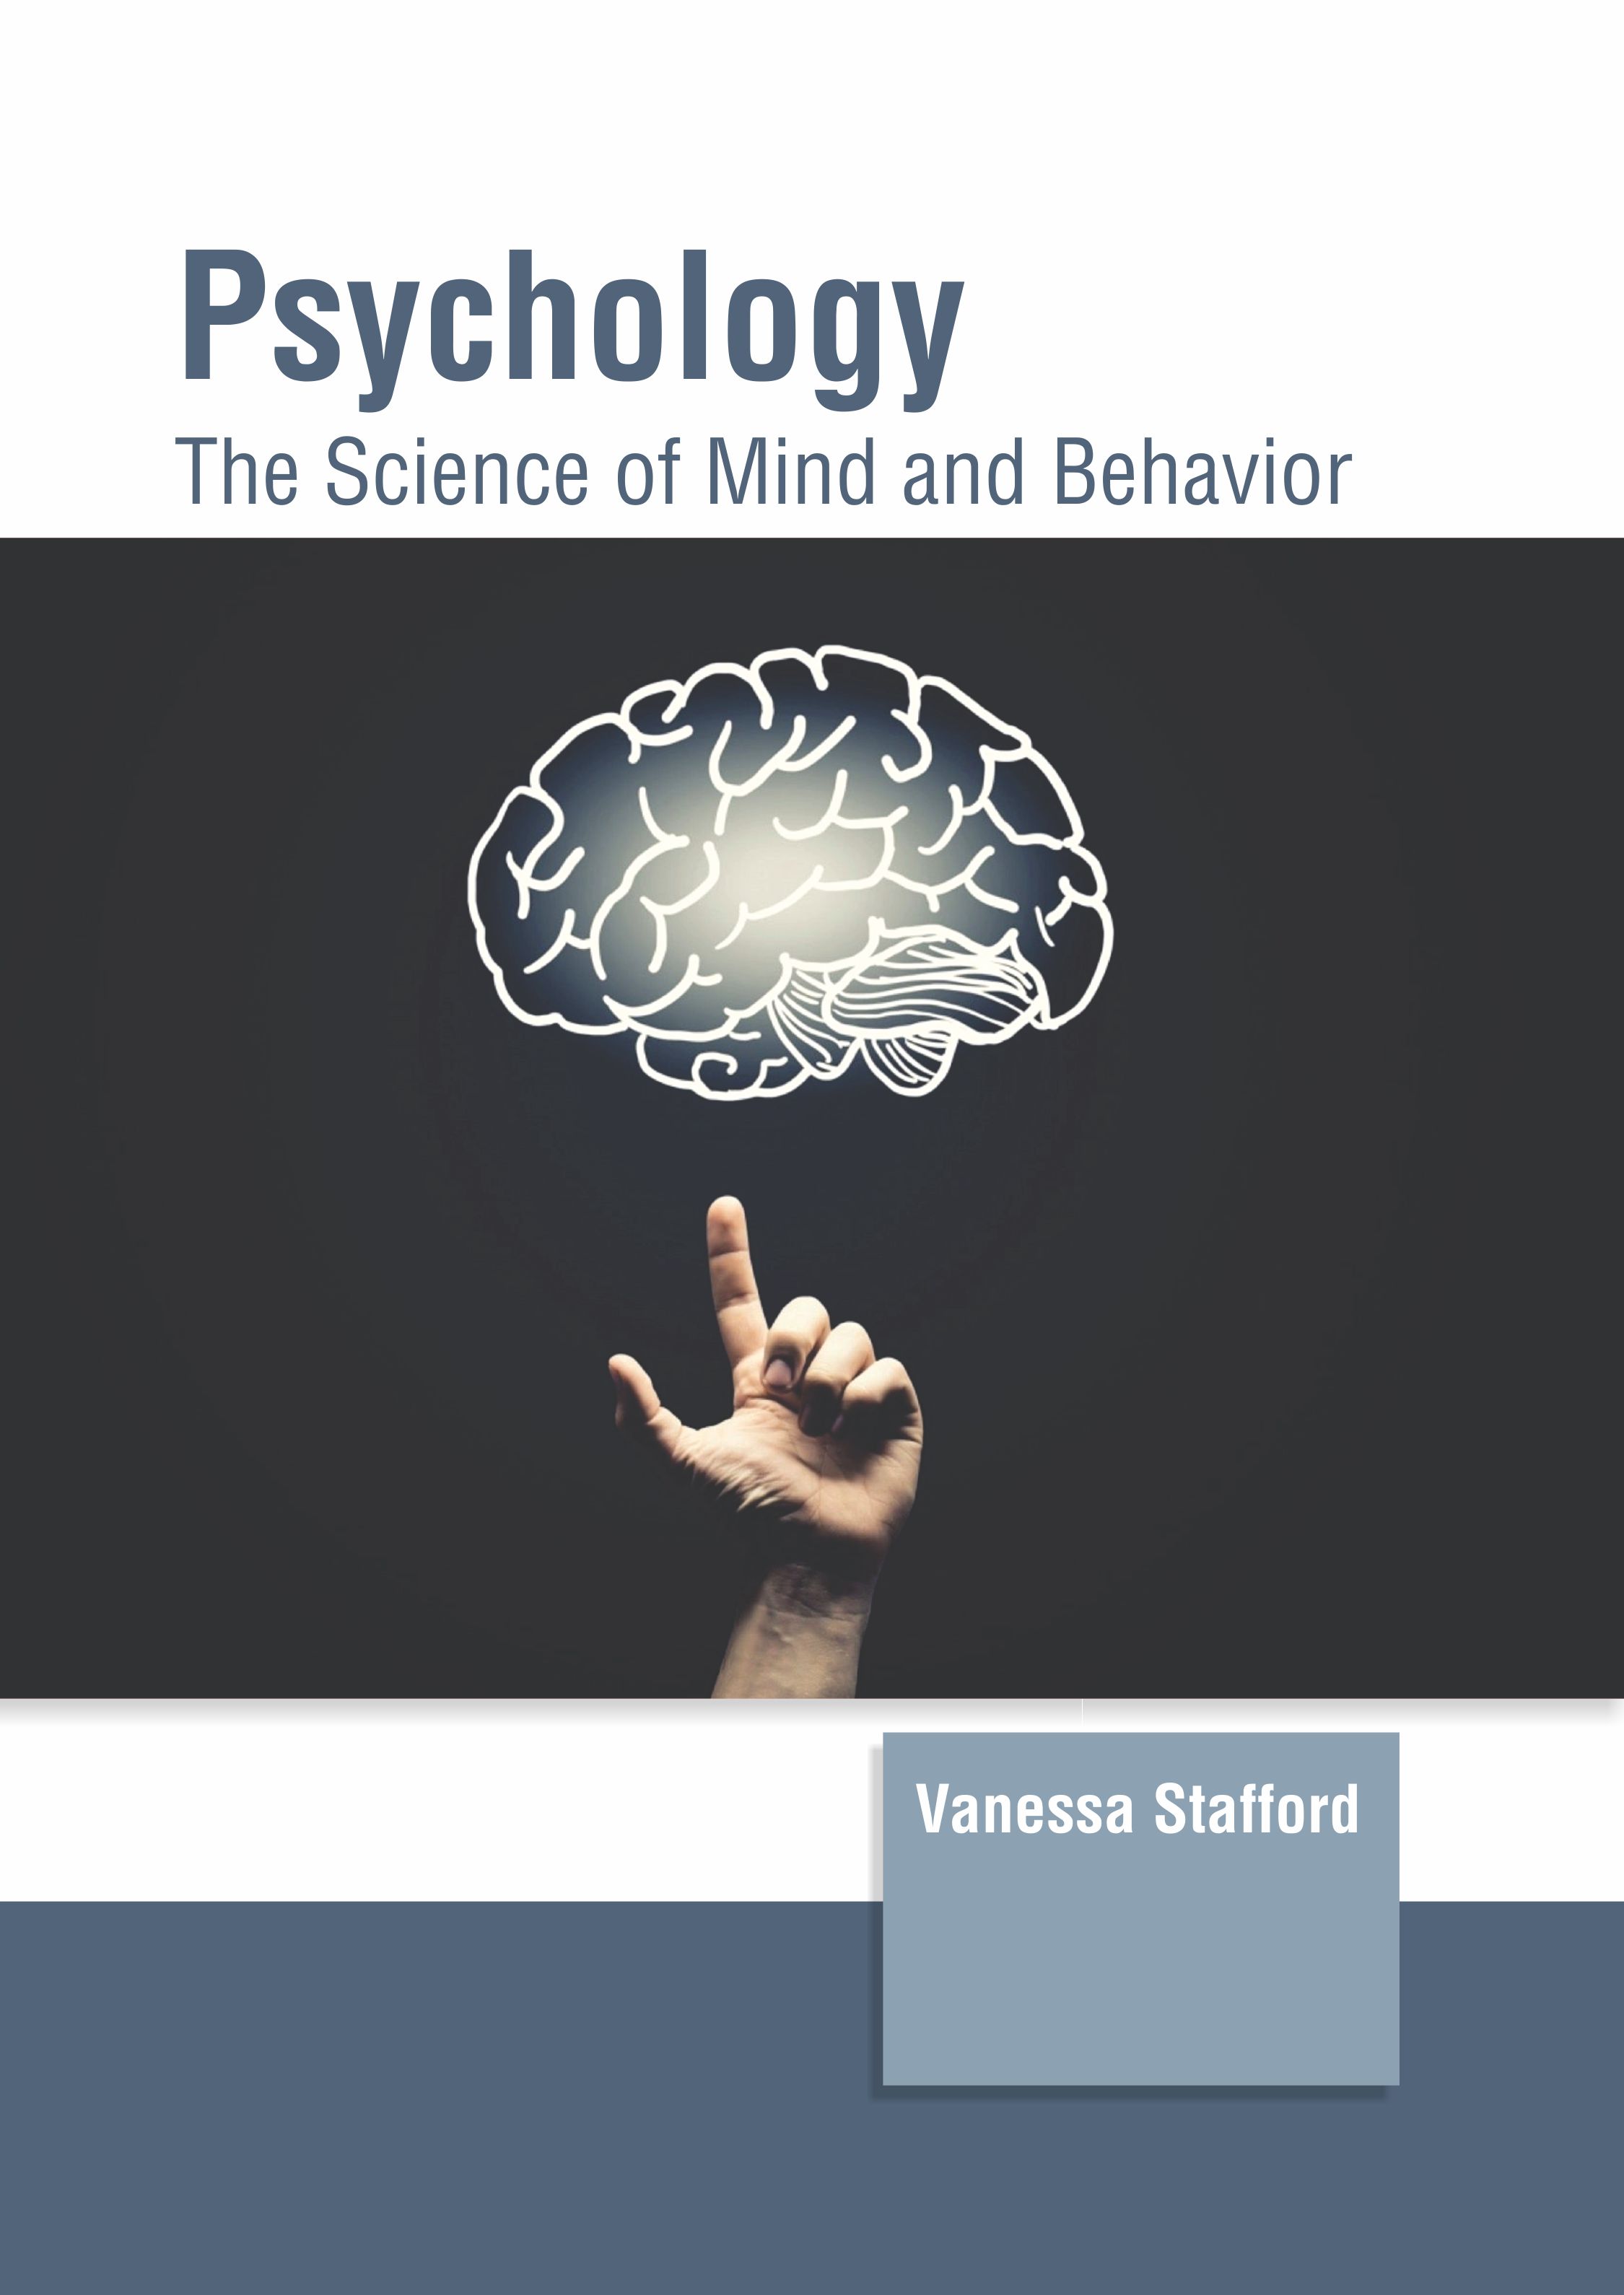 PSYCHOLOGY: THE SCIENCE OF MIND AND BEHAVIOR